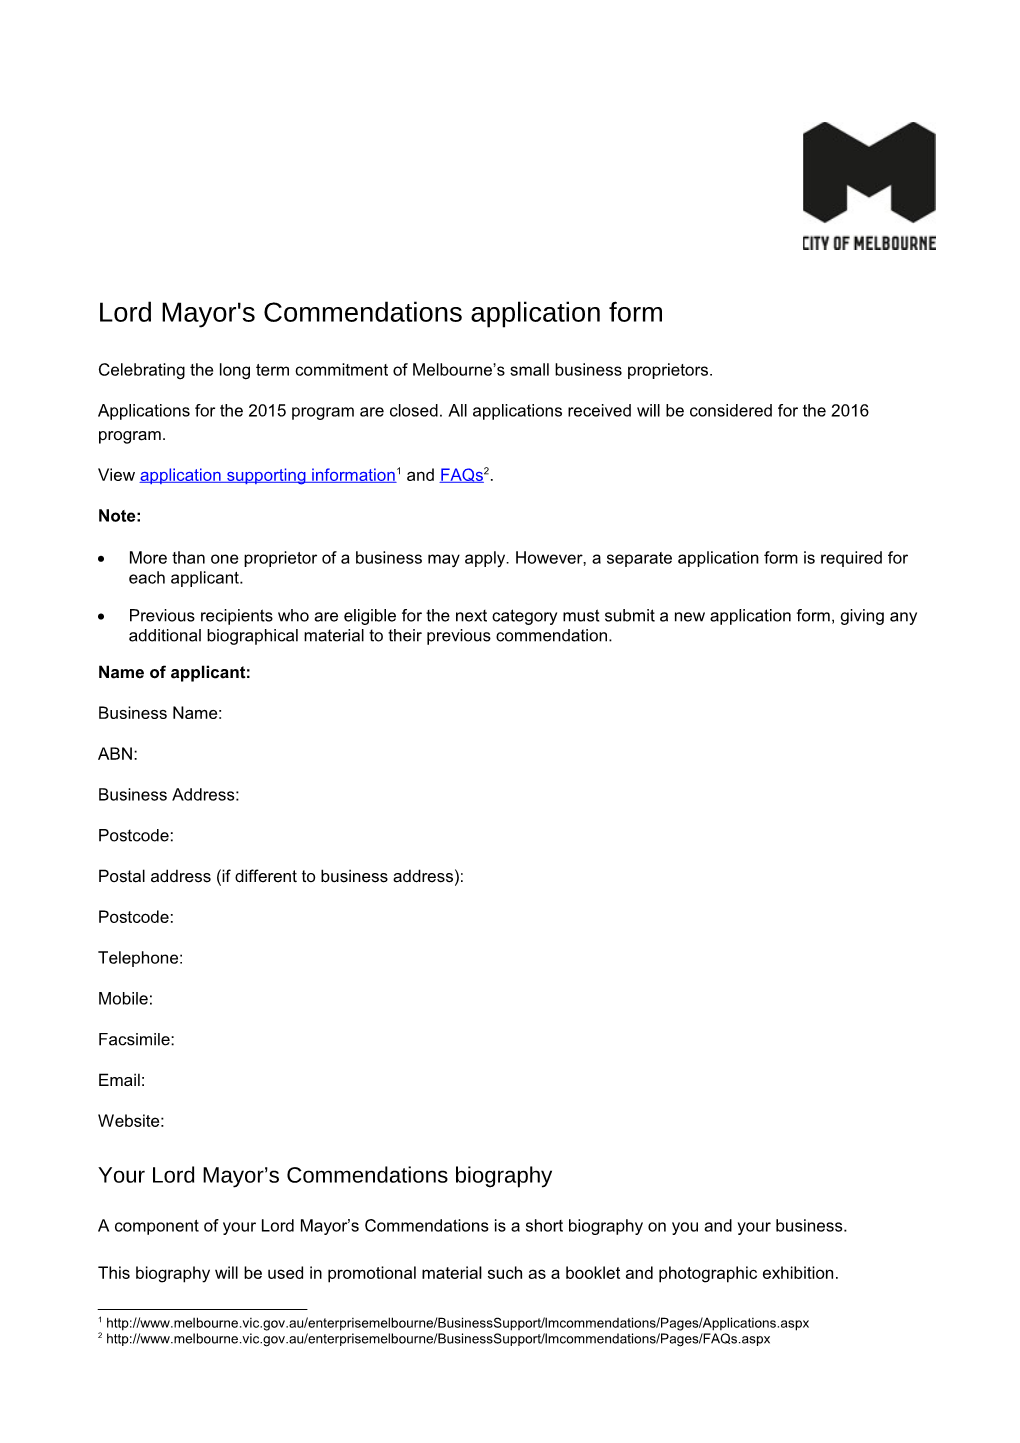 Lord Mayor's Commendations Application Form